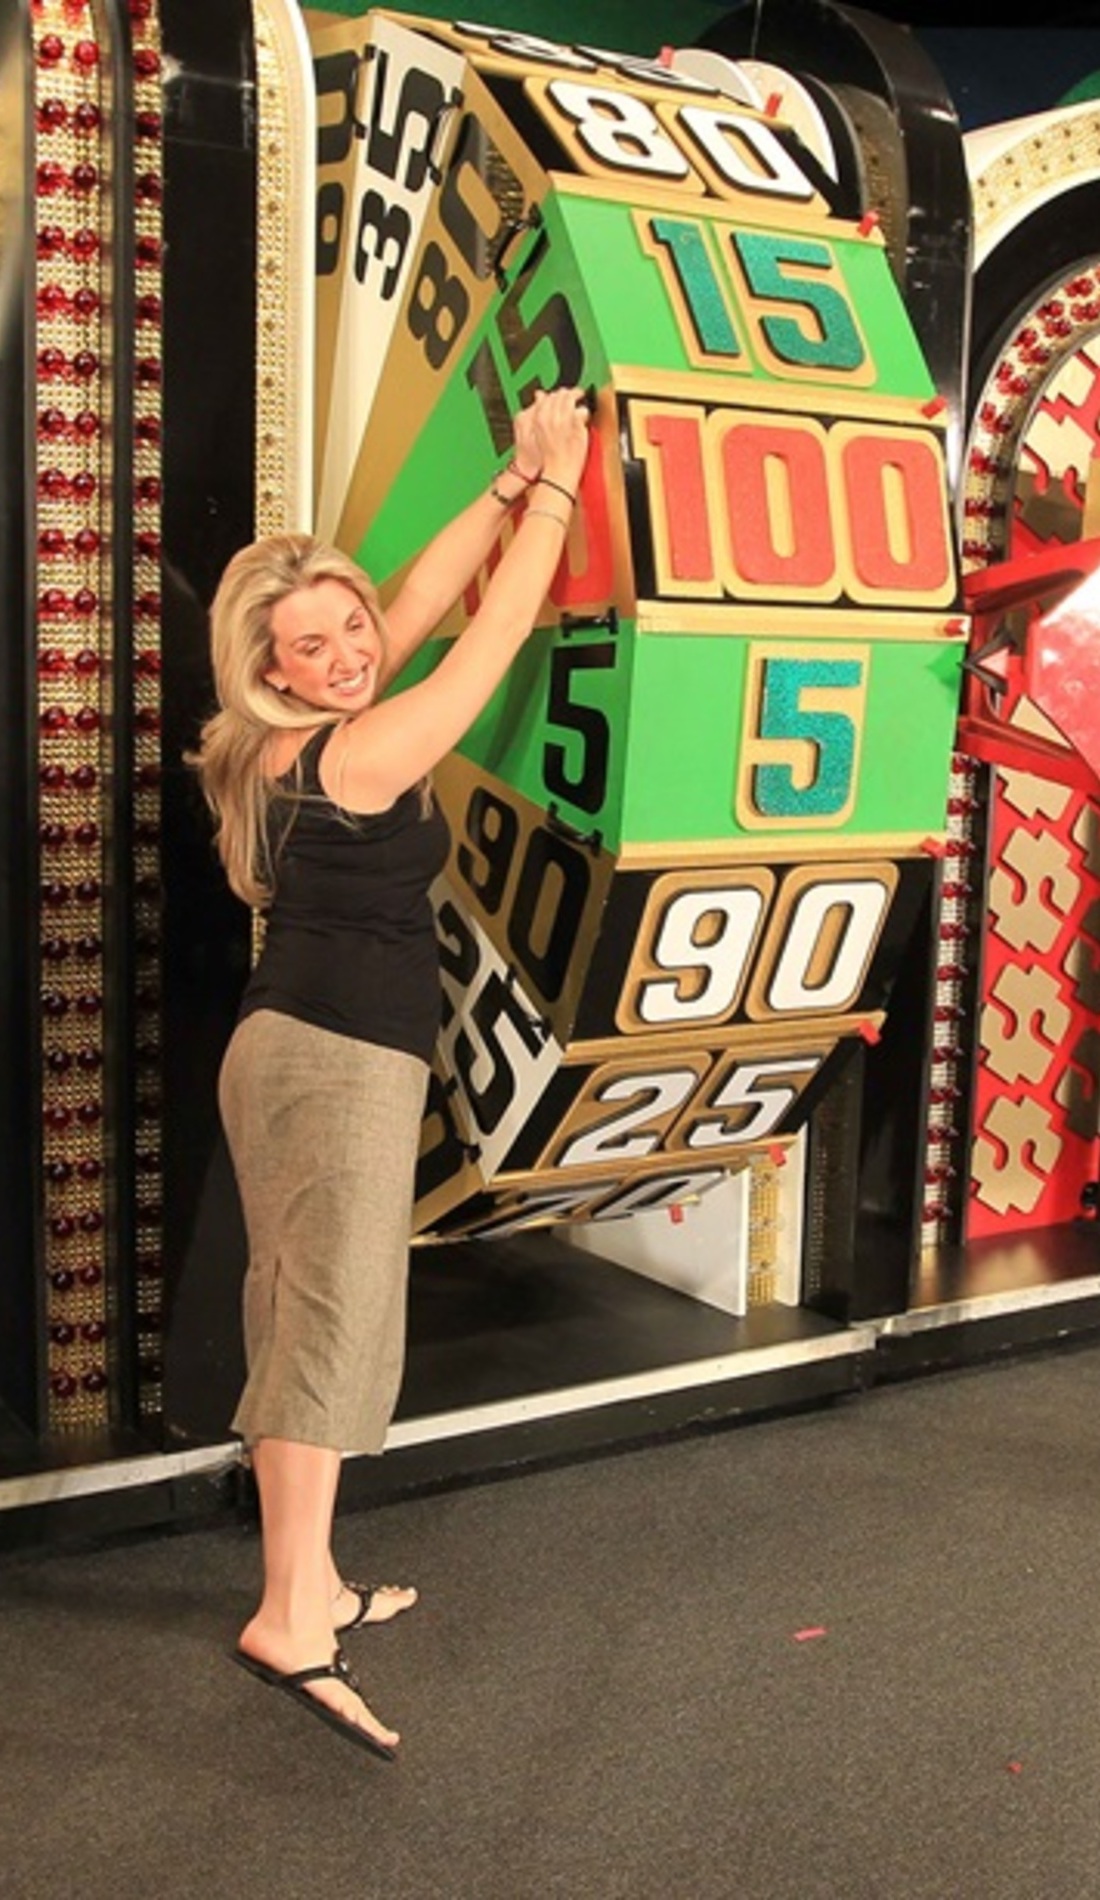 A The Price Is Right Live live event